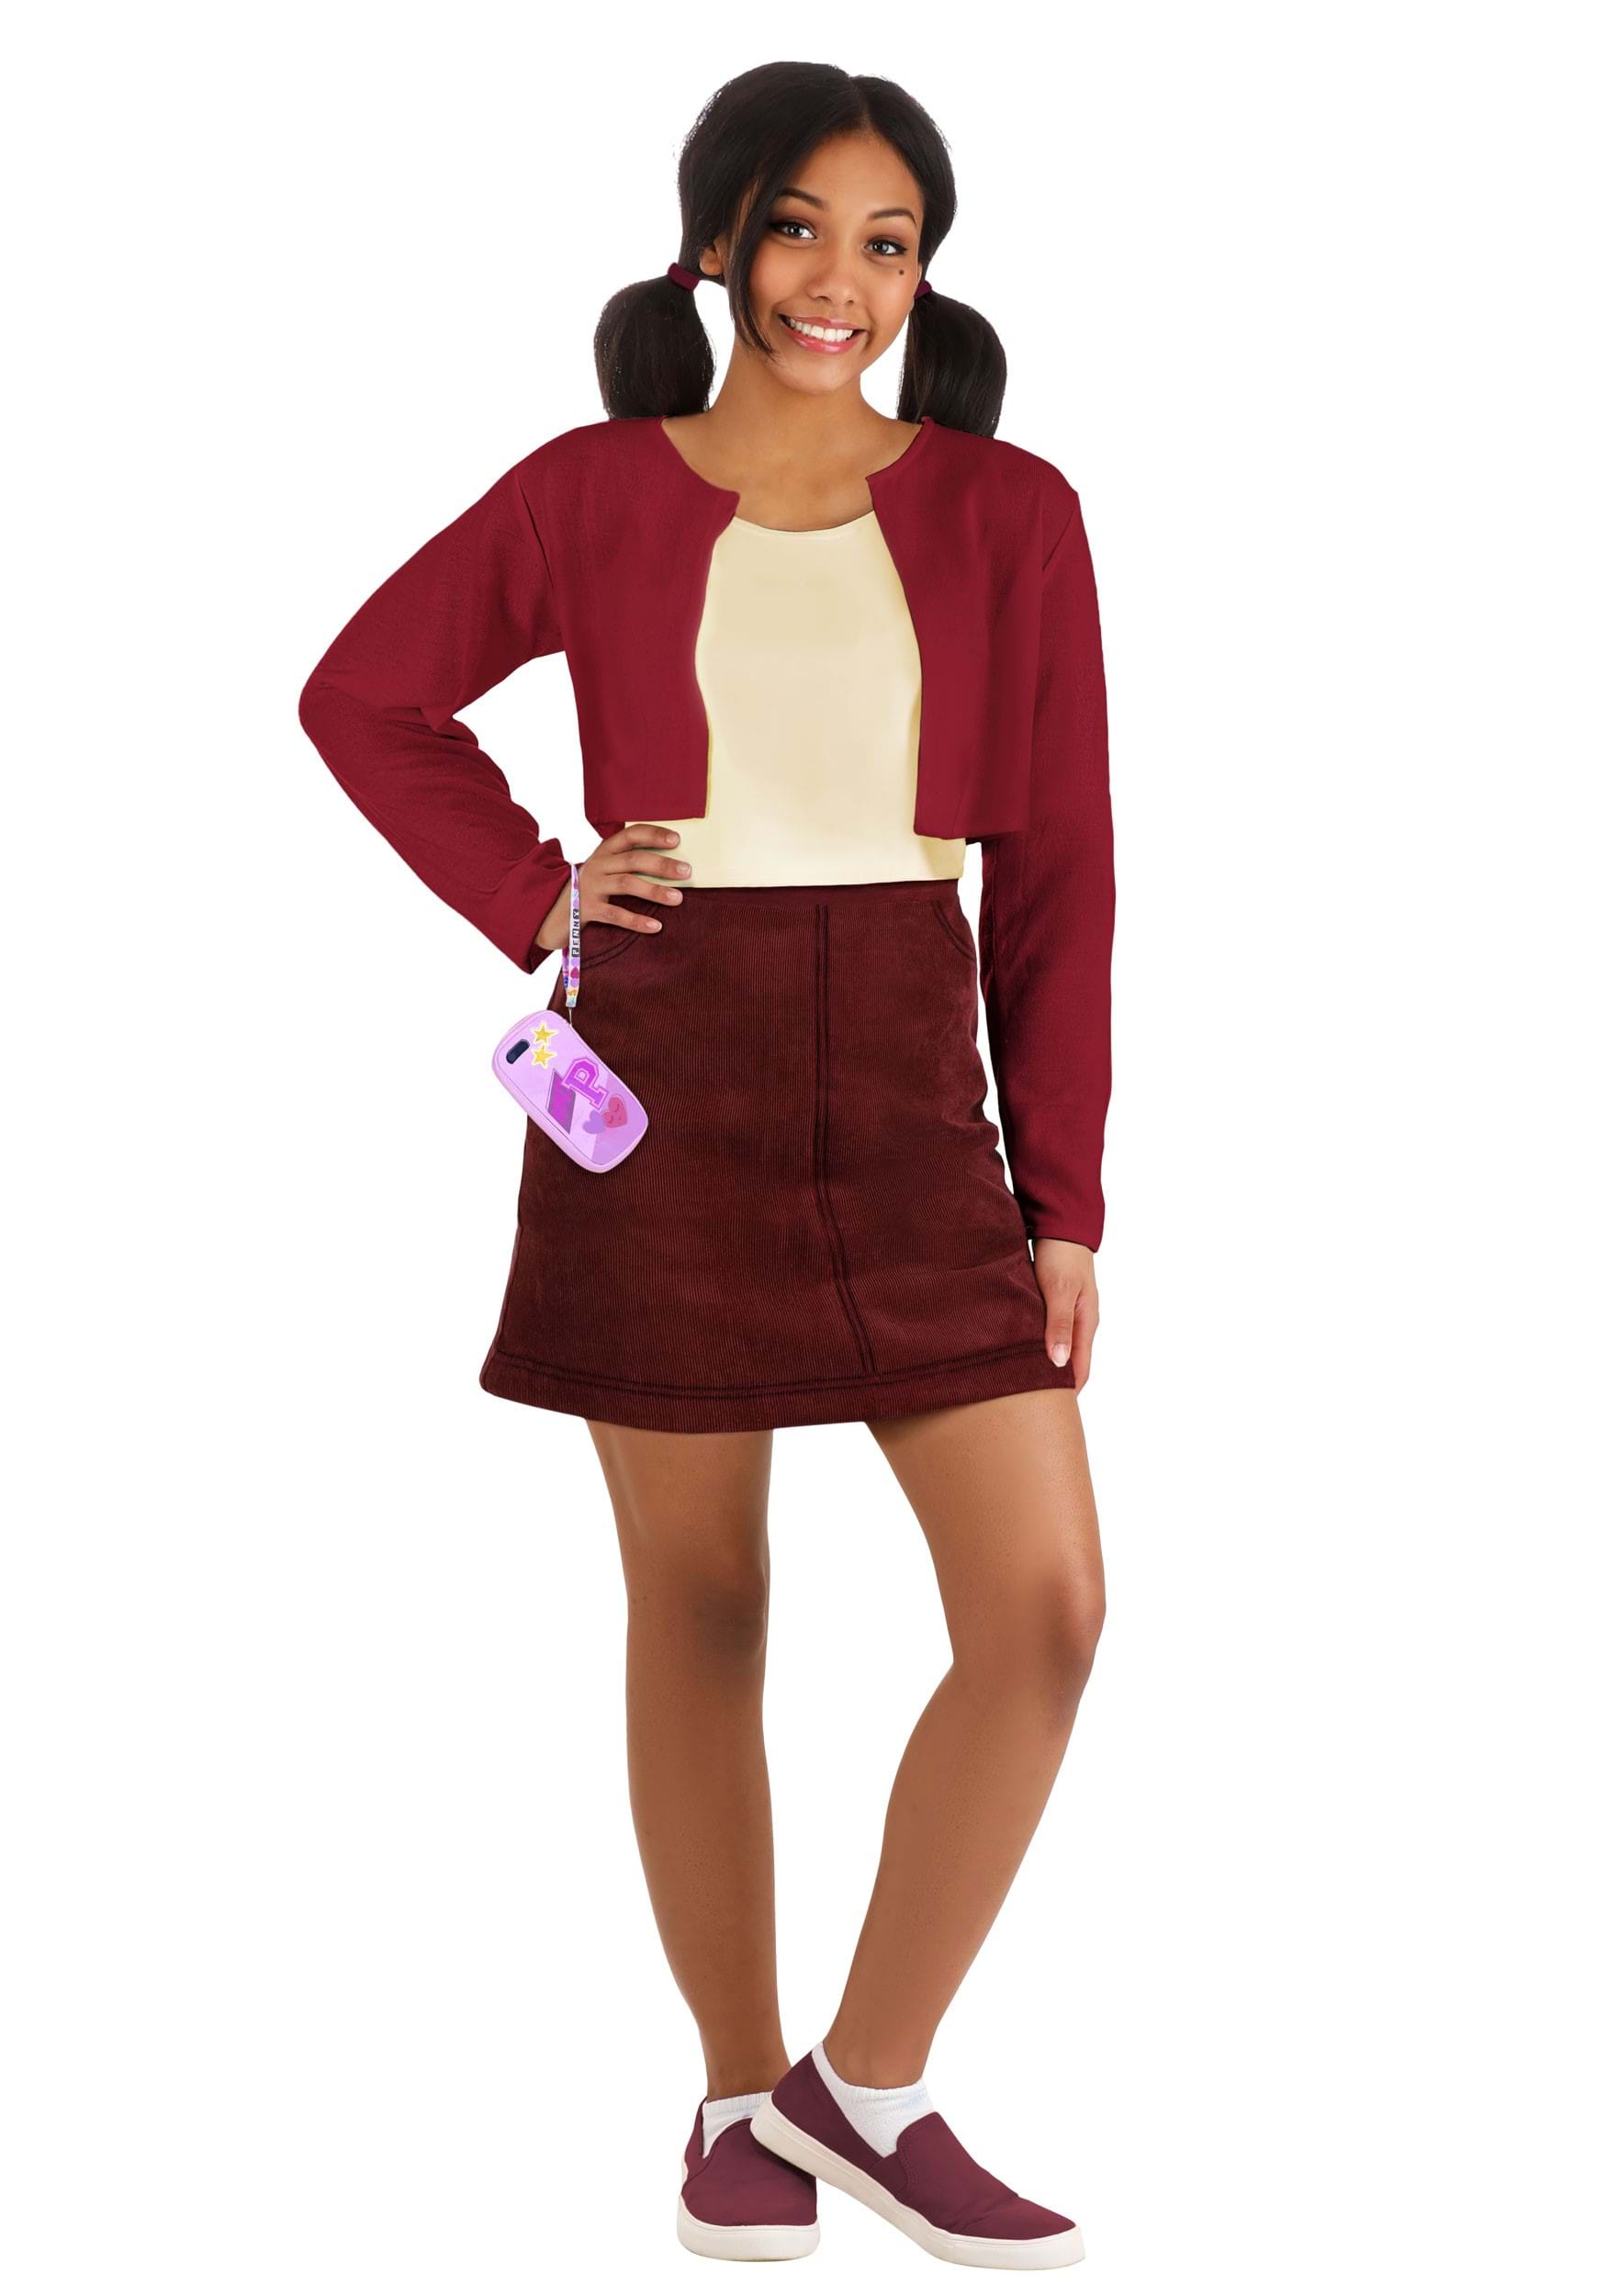 Penny Proud Costume for Adults